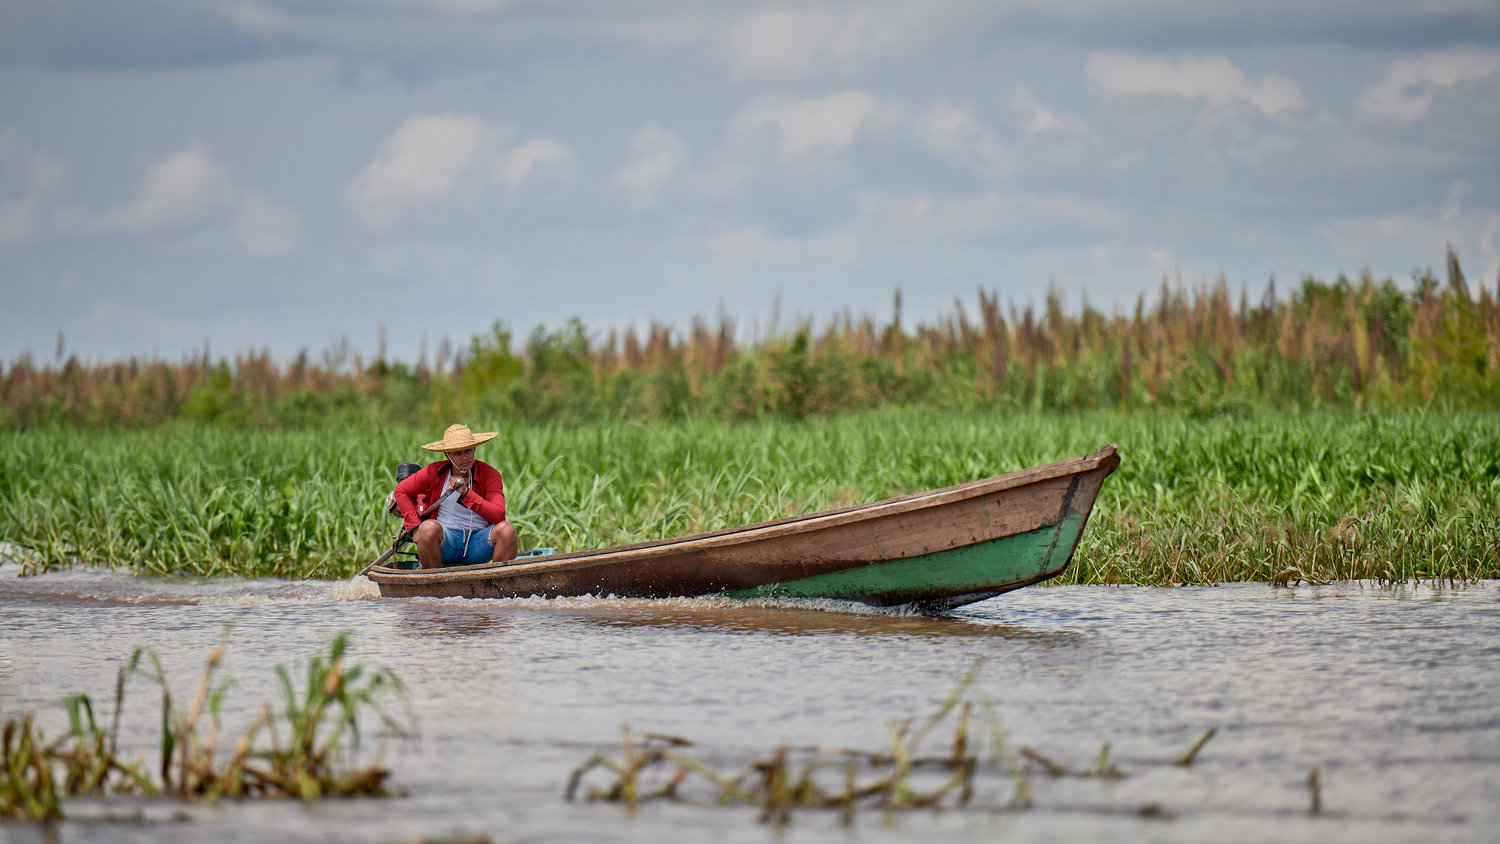 A boat cruises along the Javari River at Atalaia do Norte in Brazil’s Amazon region March 25, 2019. Franciscan Father Joao Messias Sousa, who works among indigenous in the Amazon, said the people believe “God is in all things, but those things are not gods.”